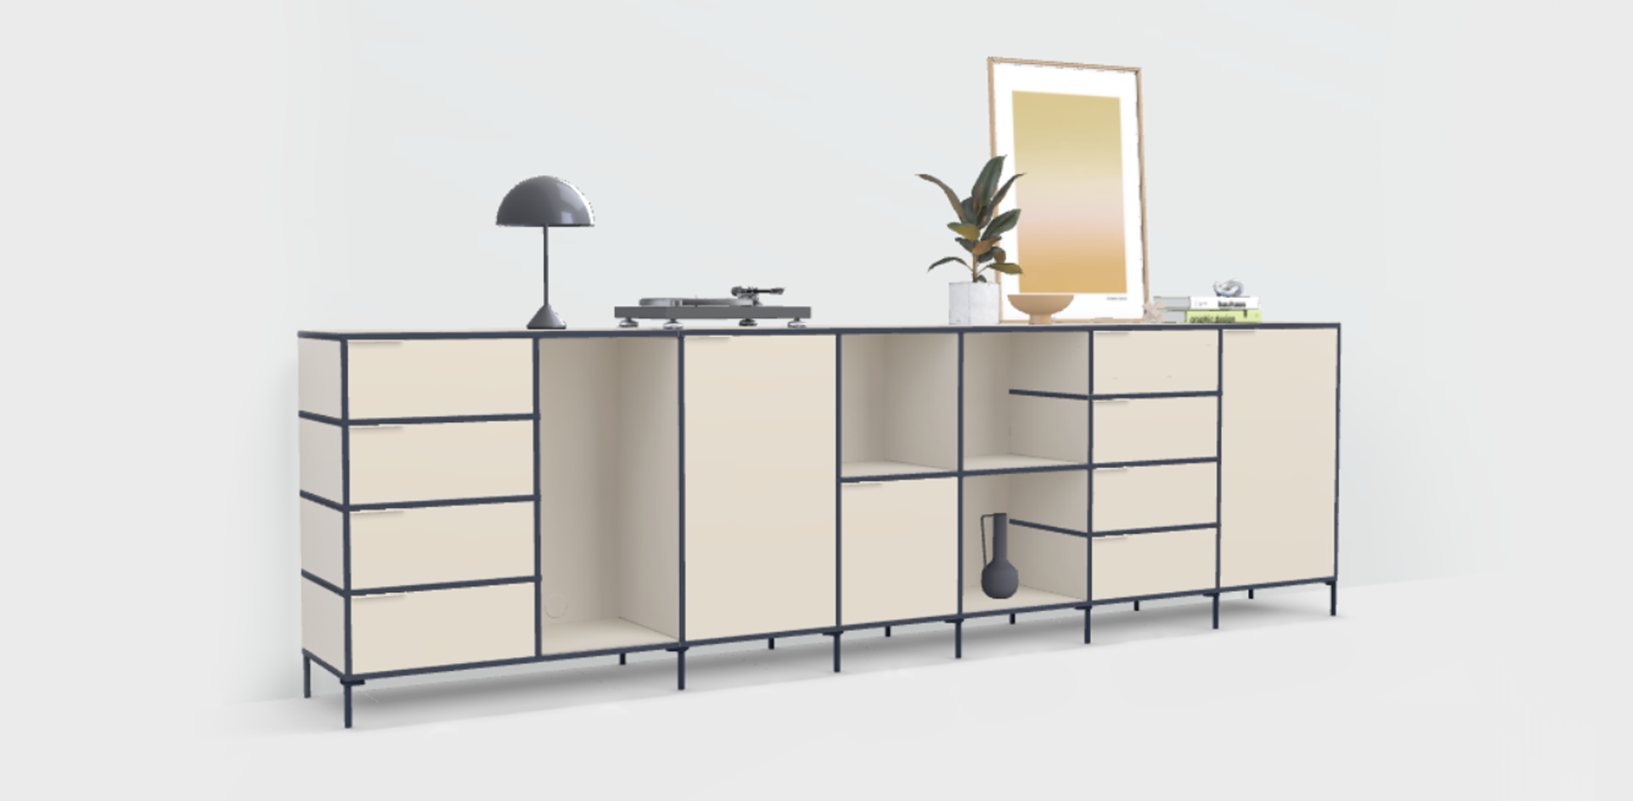 Sideboard in Beige and Blue with Doors and Drawers